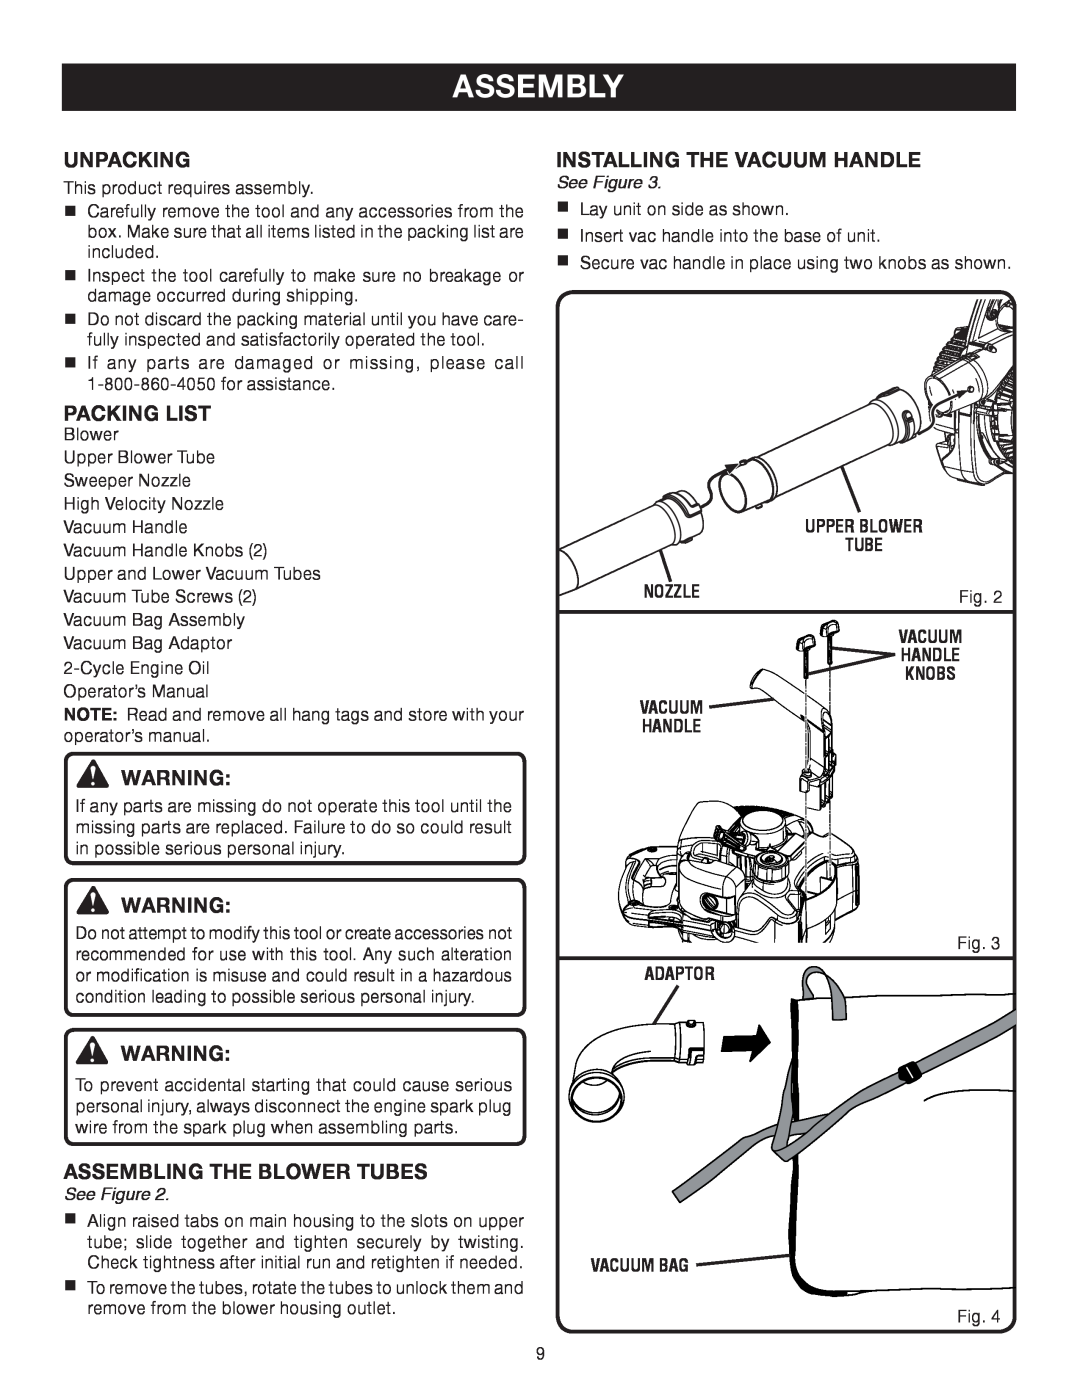 Ryobi RY08510 Assembly, Unpacking, Packing List, Assembling The Blower Tubes, Installing The Vacuum Handle, See Figure 